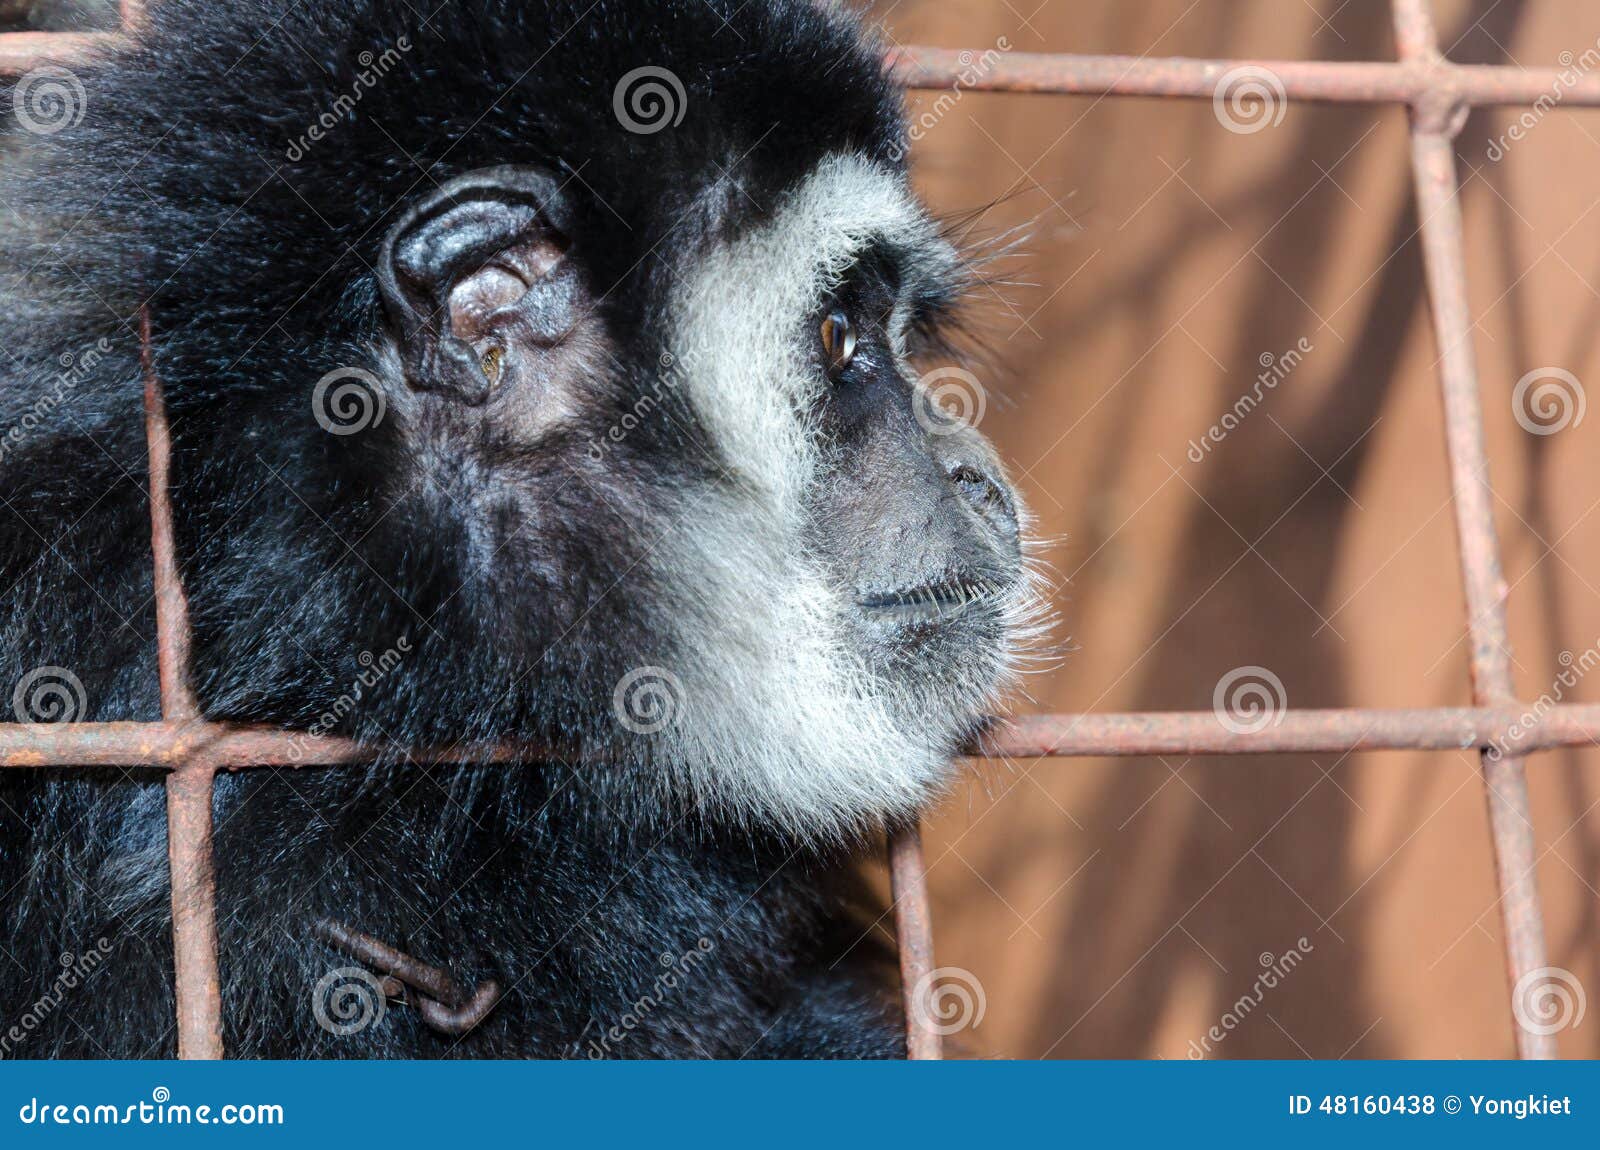 face and eyes downcast of gibbon in a cage